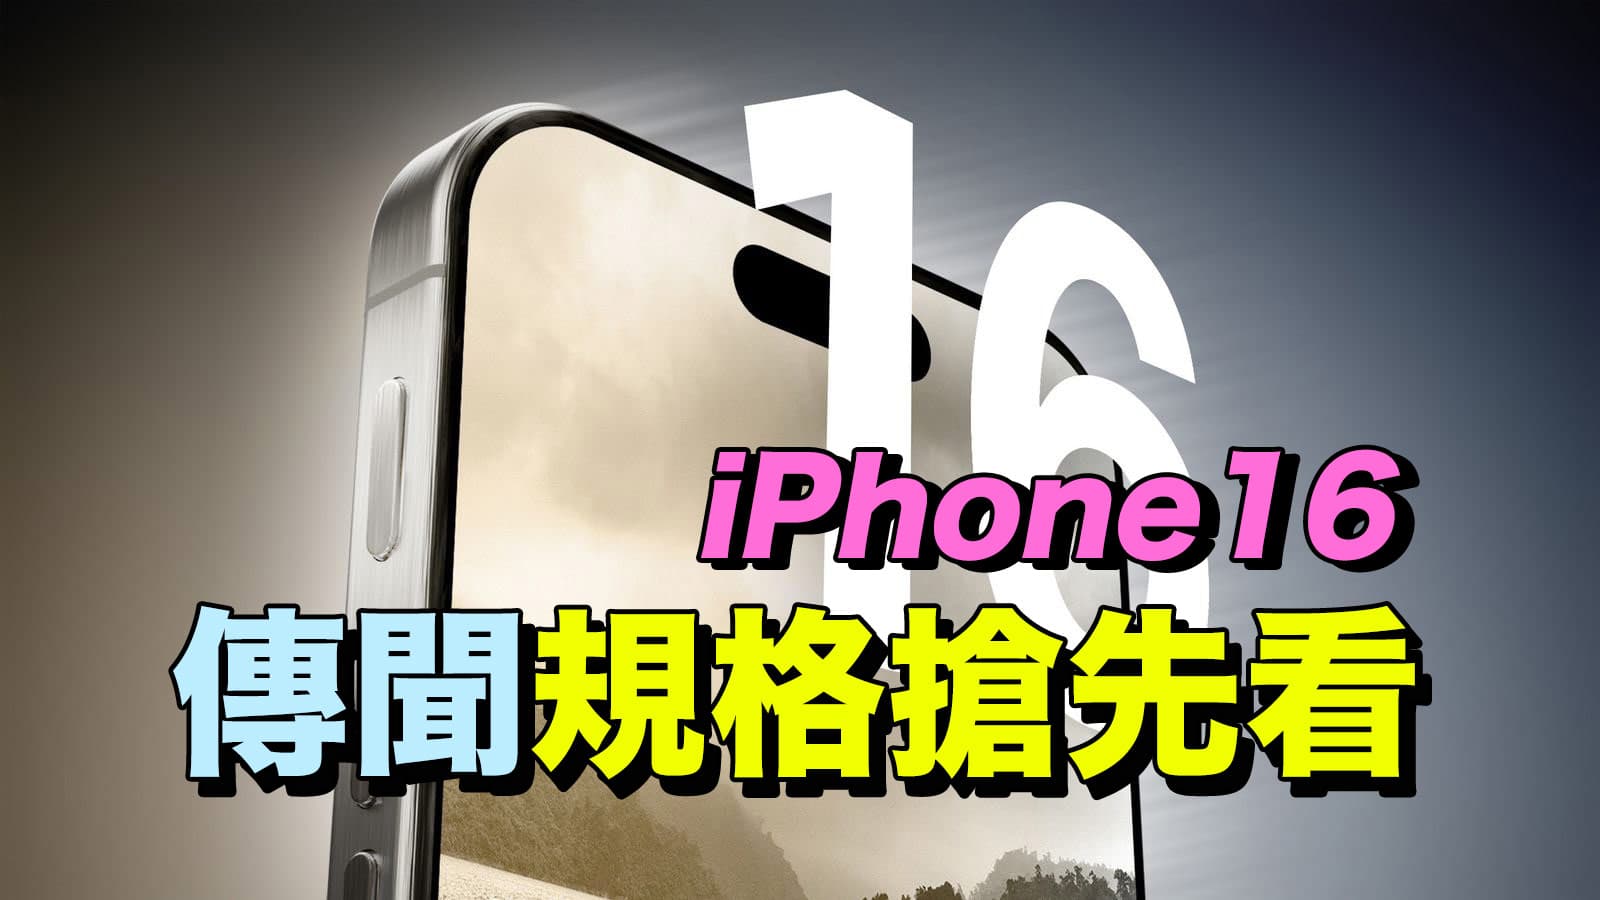 iphone 16 series rumored new features